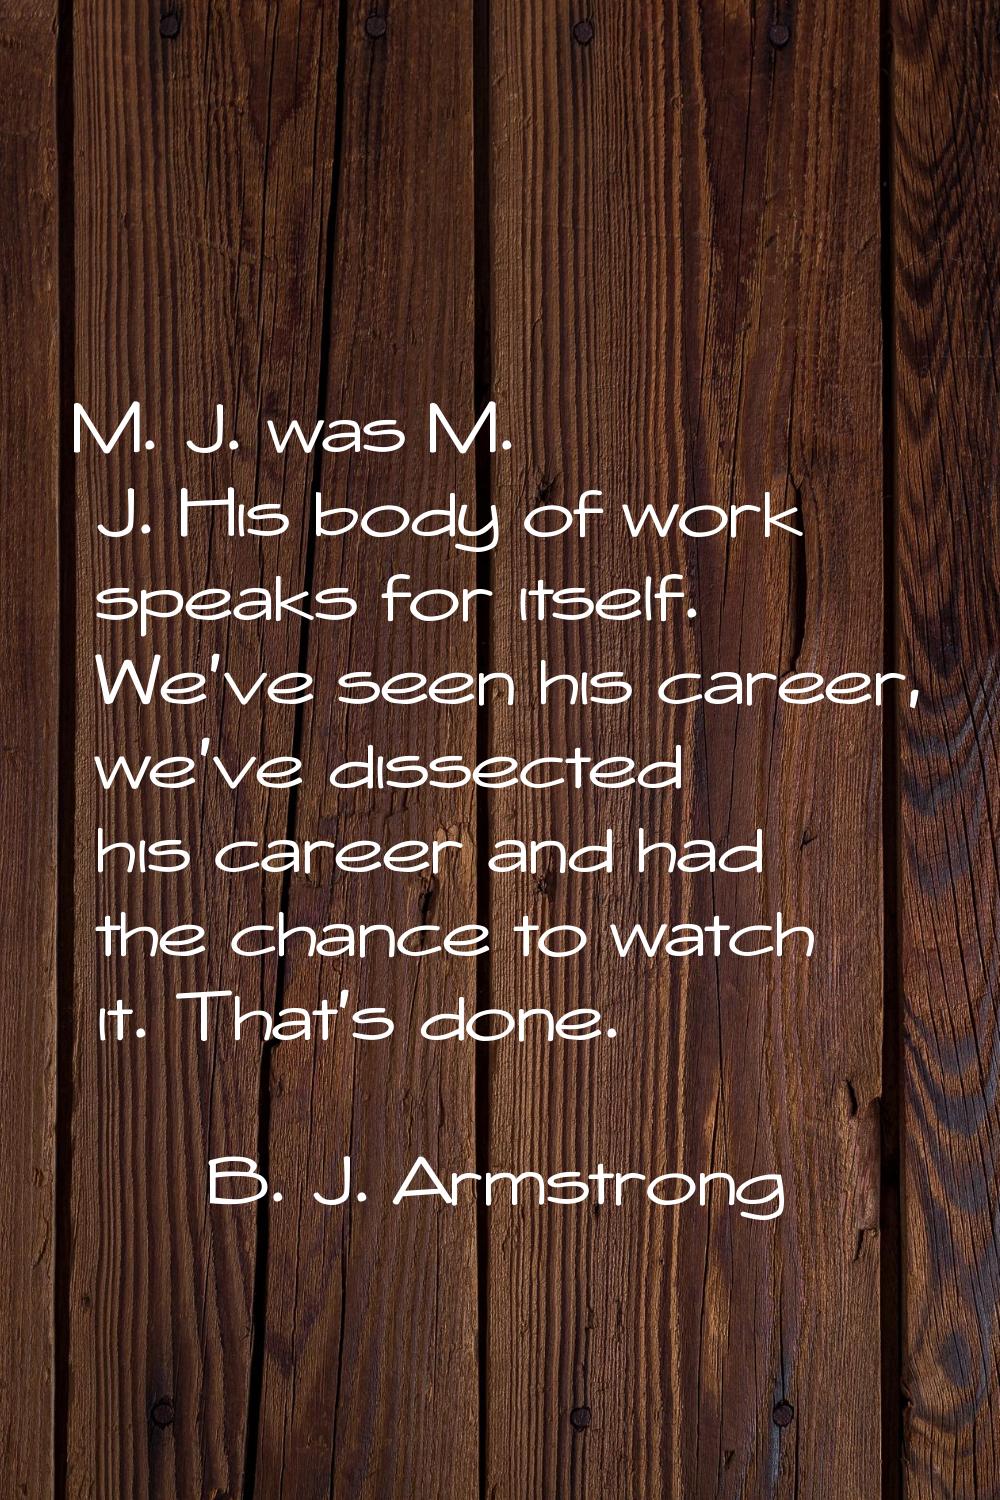 M. J. was M. J. His body of work speaks for itself. We've seen his career, we've dissected his care